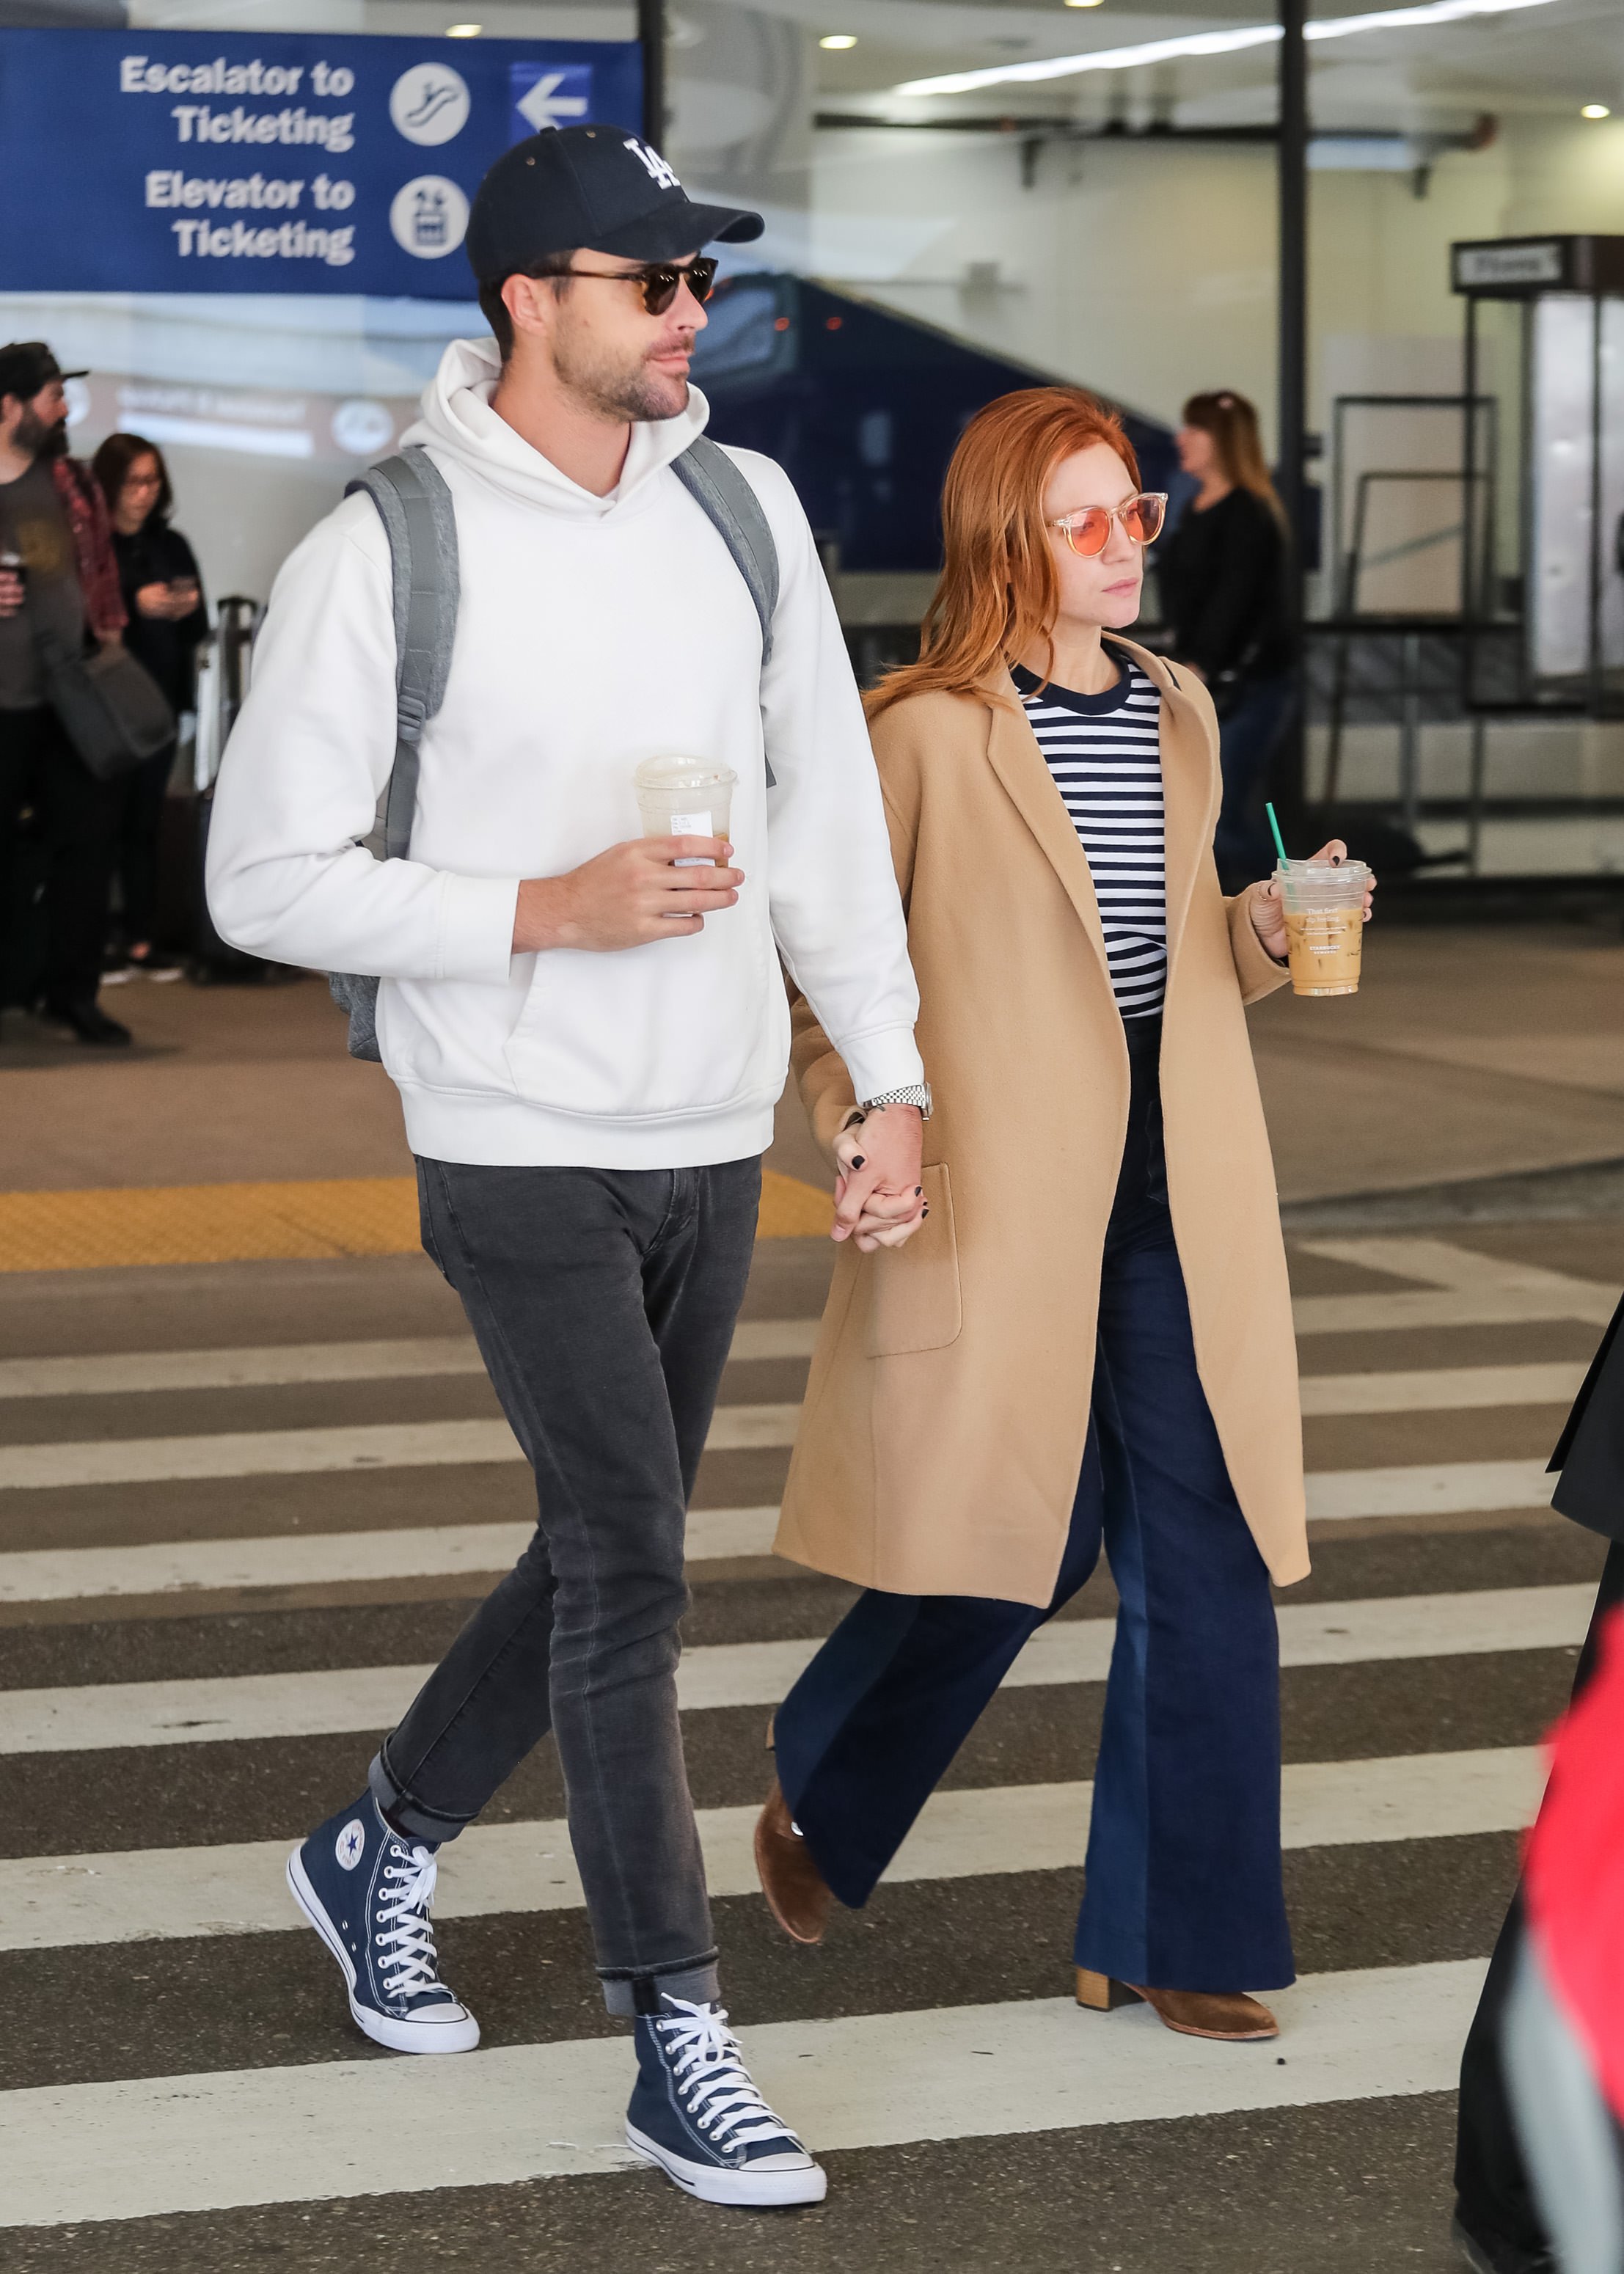 Brittany Snow and Tyler Stanaland are photographed at LAX airport in Los Angeles, on February 05, 2020 | Source: Getty Images